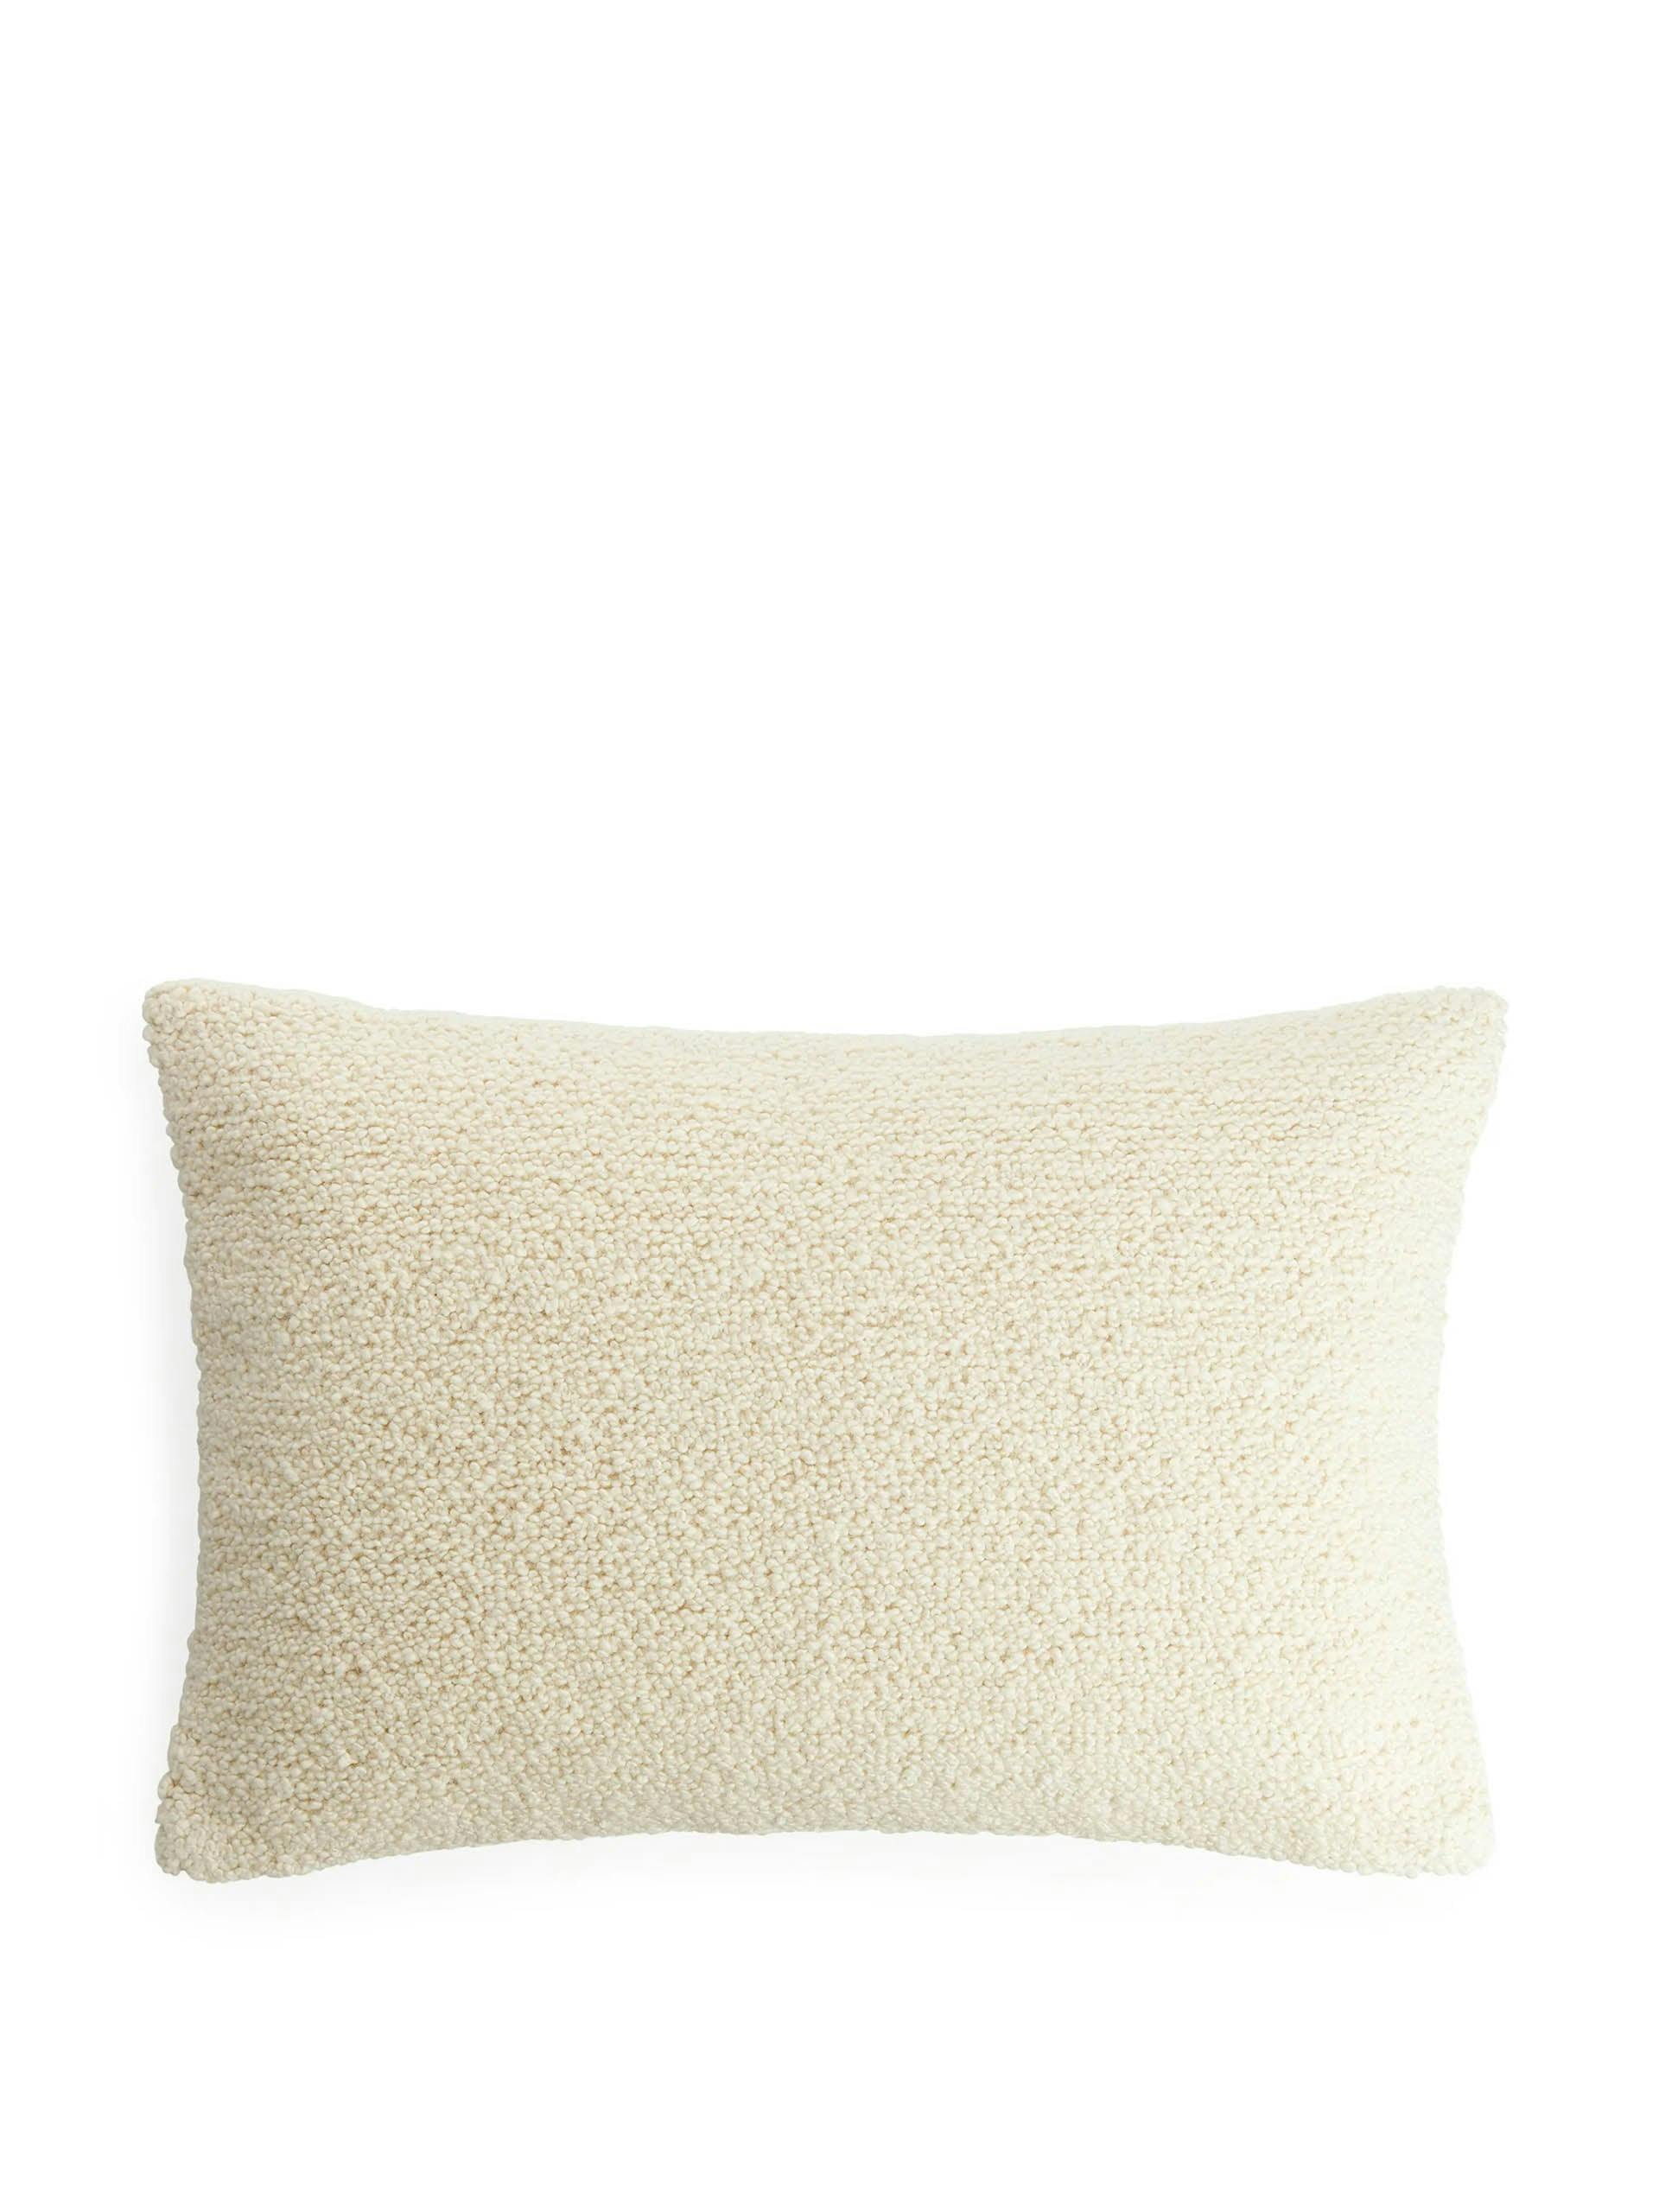 Beige handwoven wool cushion cover